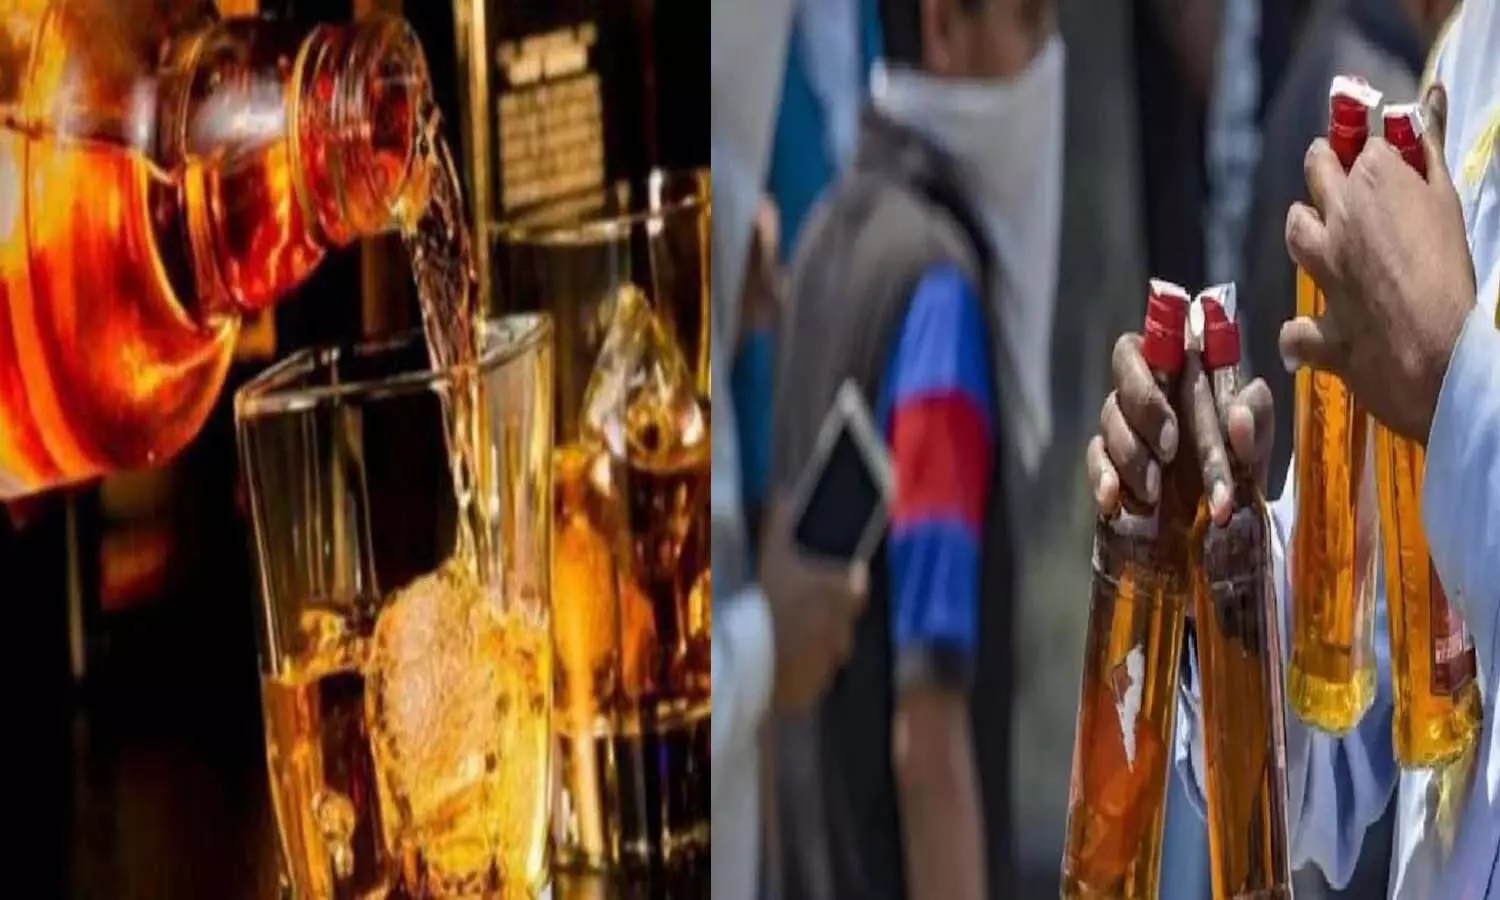 Jhansiwalas consumed liquor worth more than 35 crores in the month of August